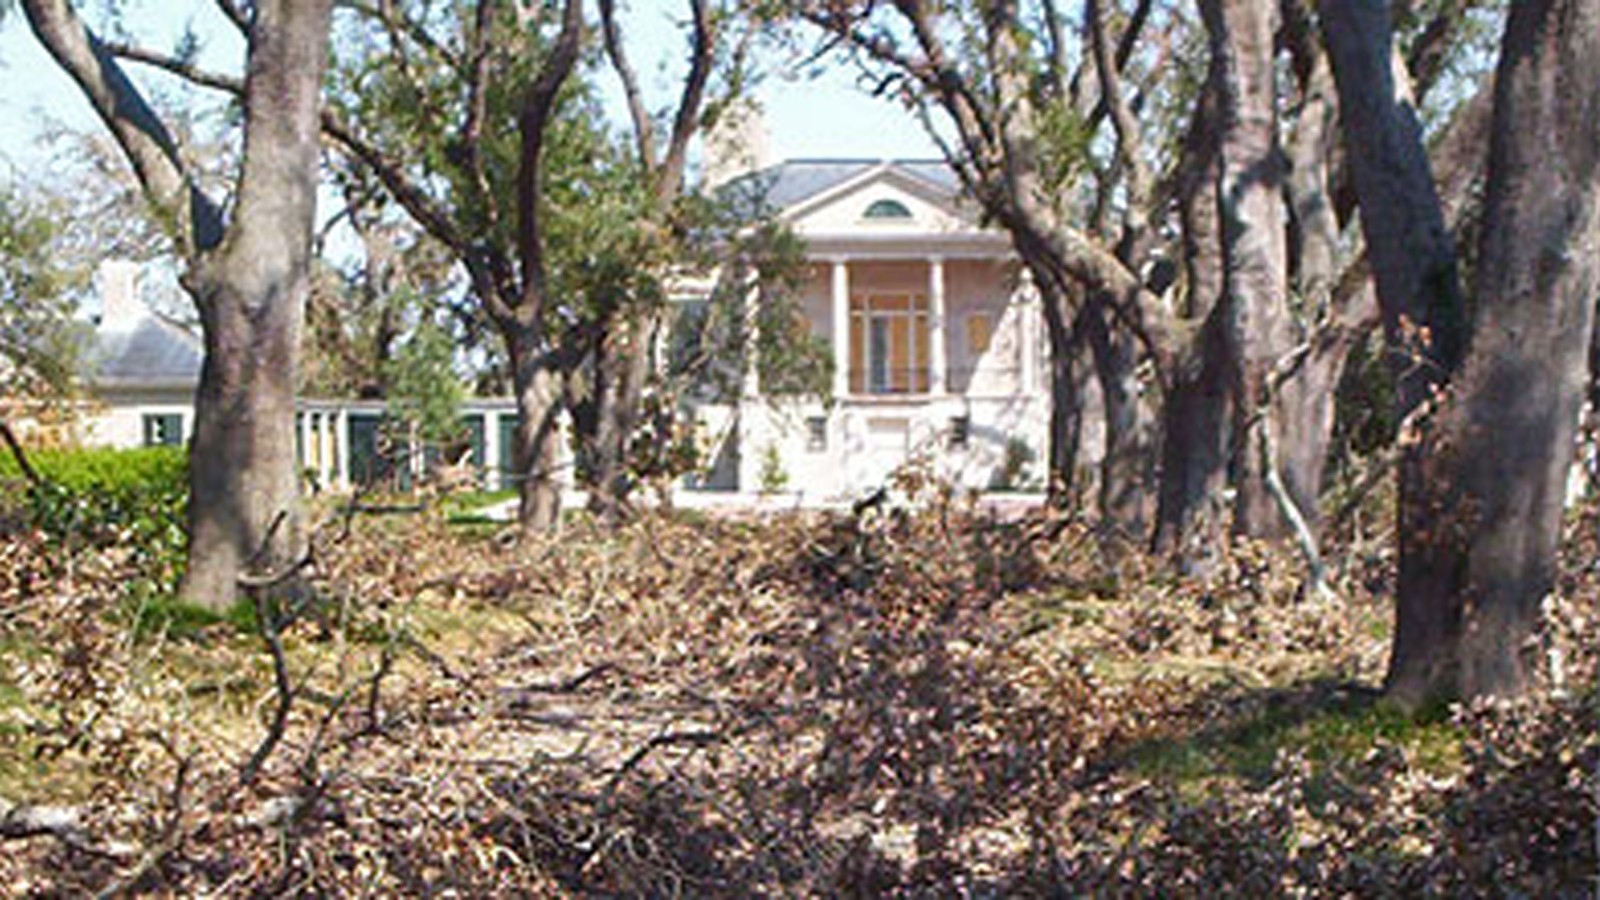 Longue Vue House and Gardens in the aftermath of Hurricane Katrina